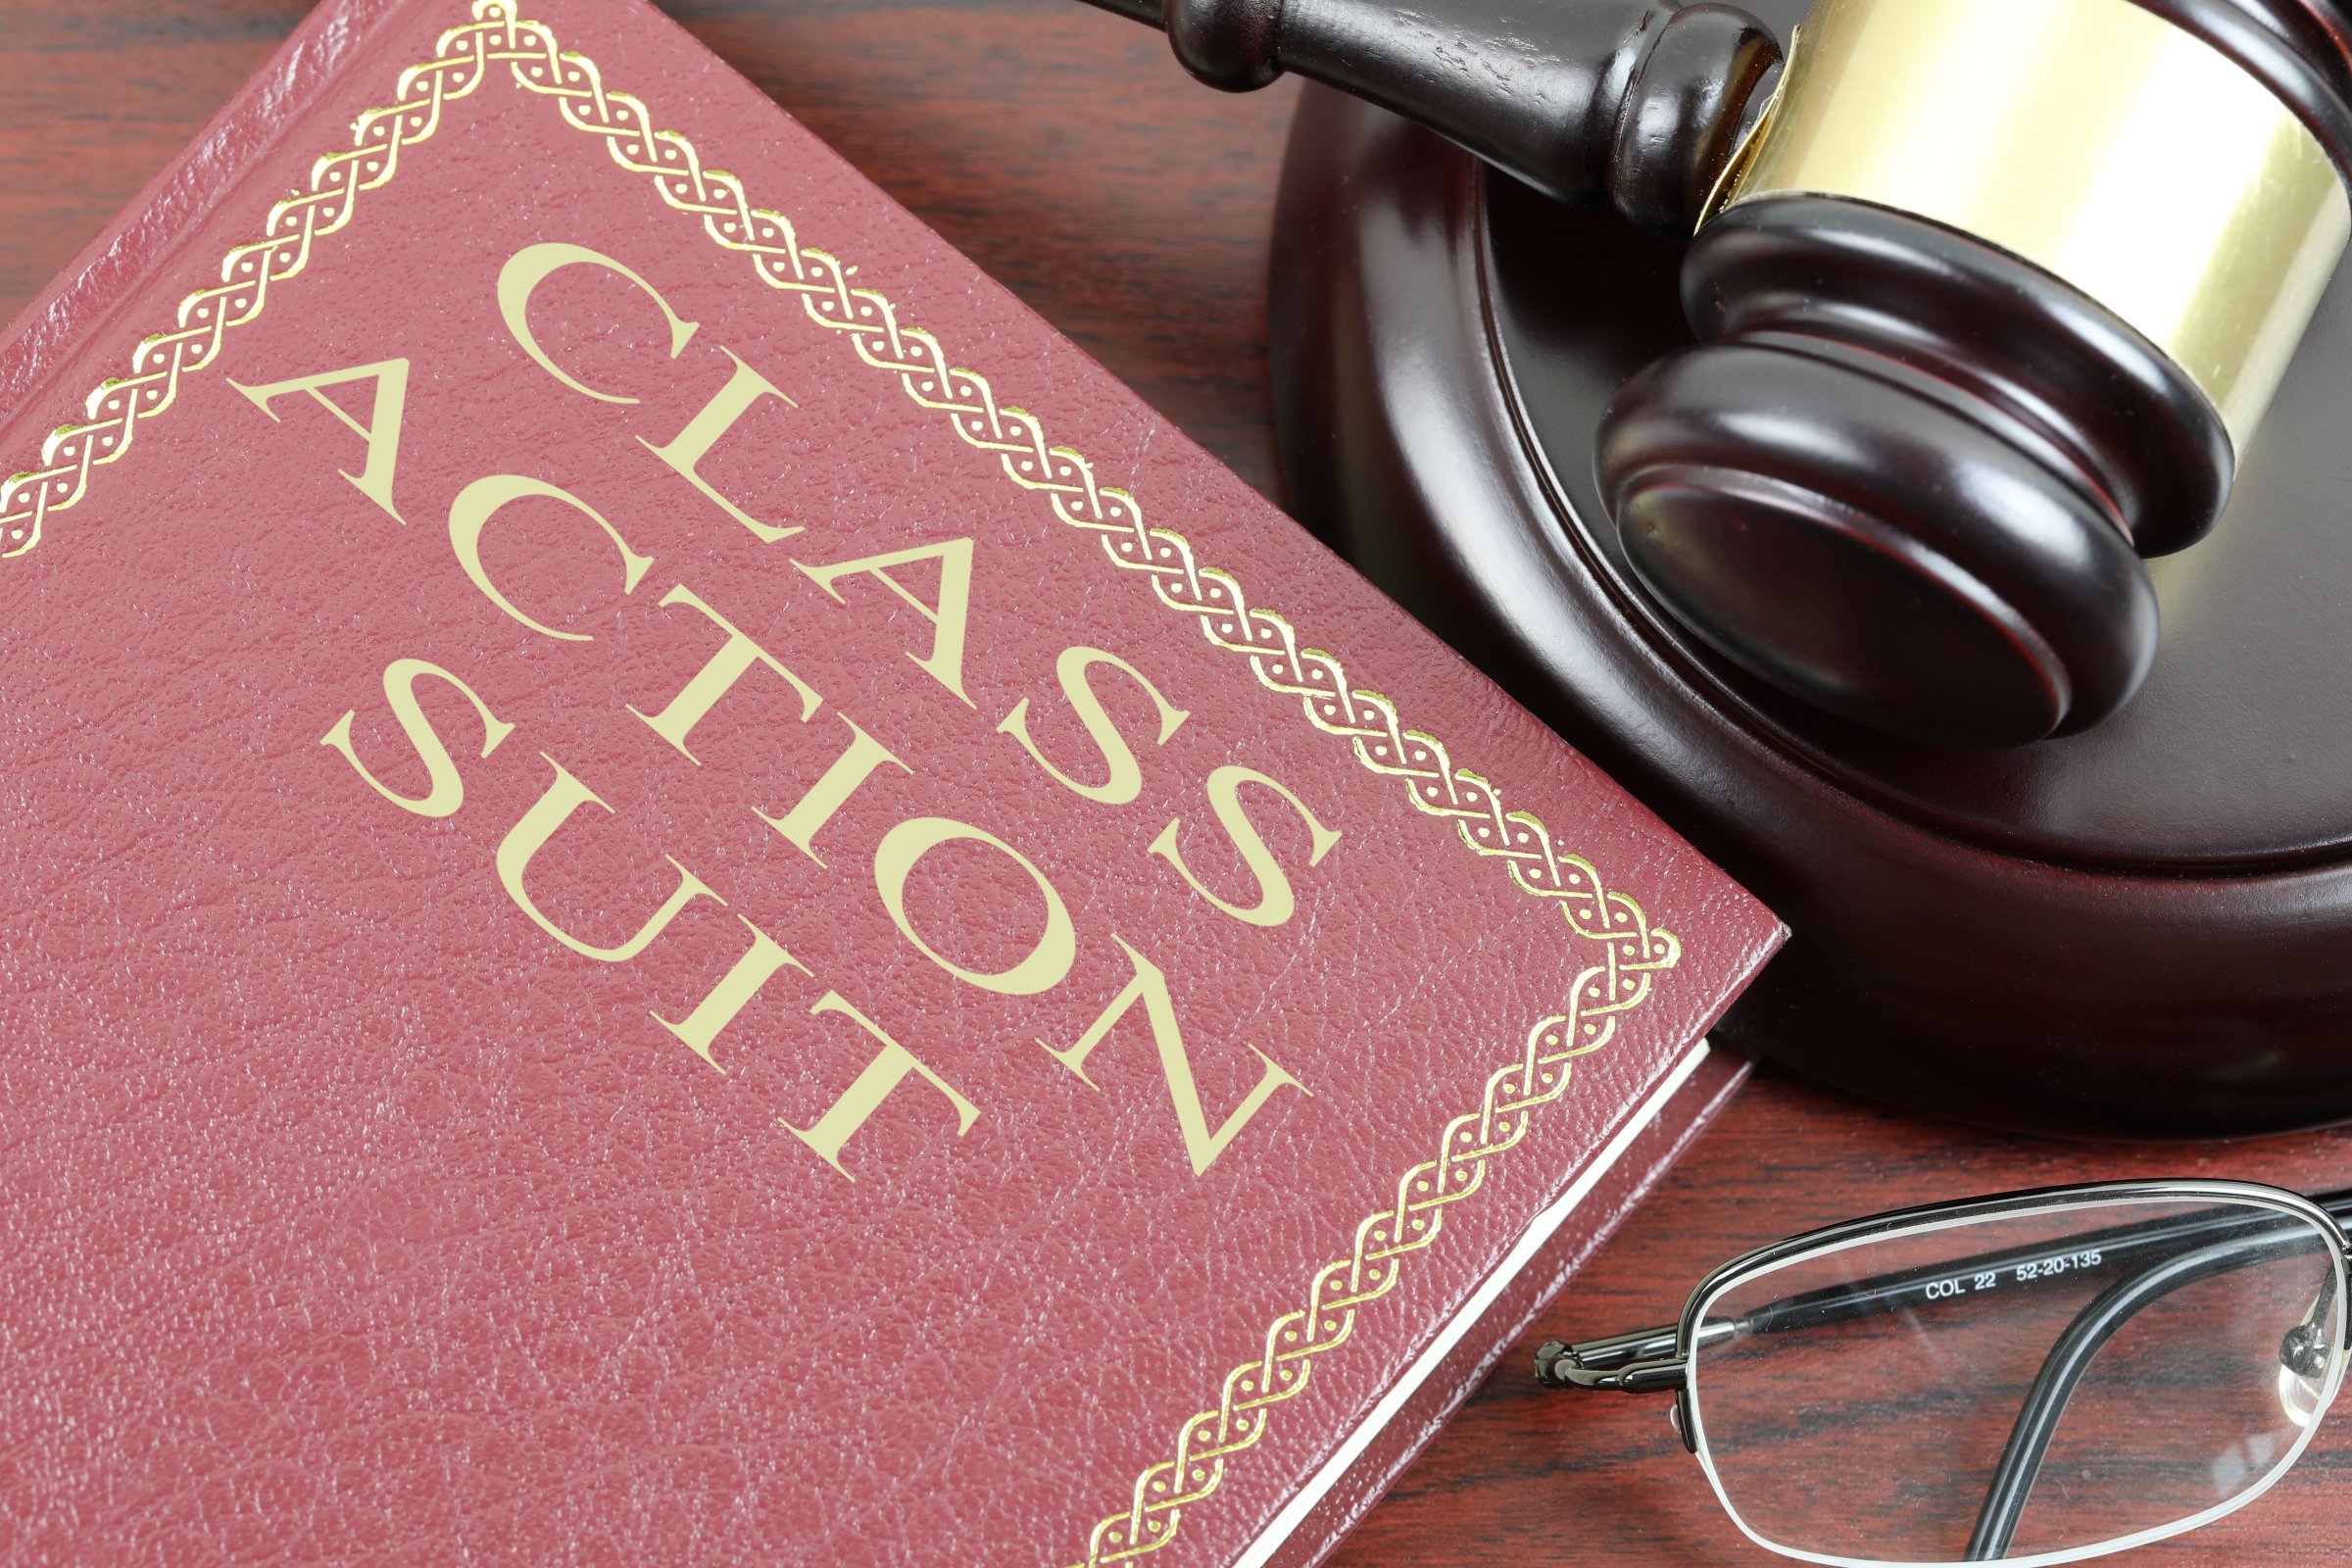 Class Action Suit Free Of Charge Creative Commons Law Book Image 6561